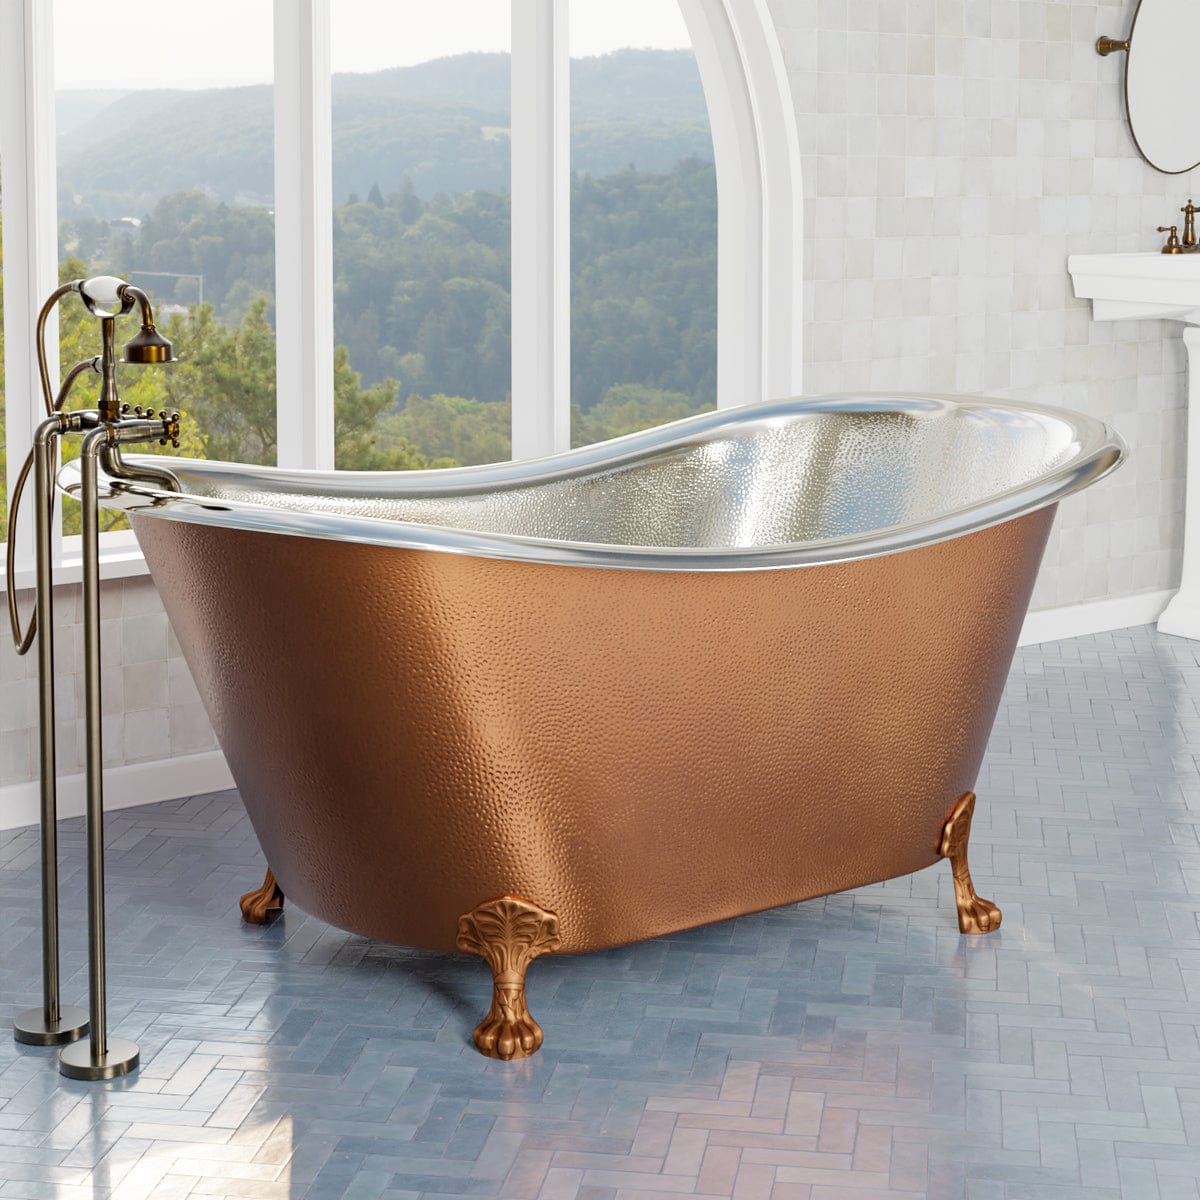 Clawfoot Tubs: Everything You Need to Know